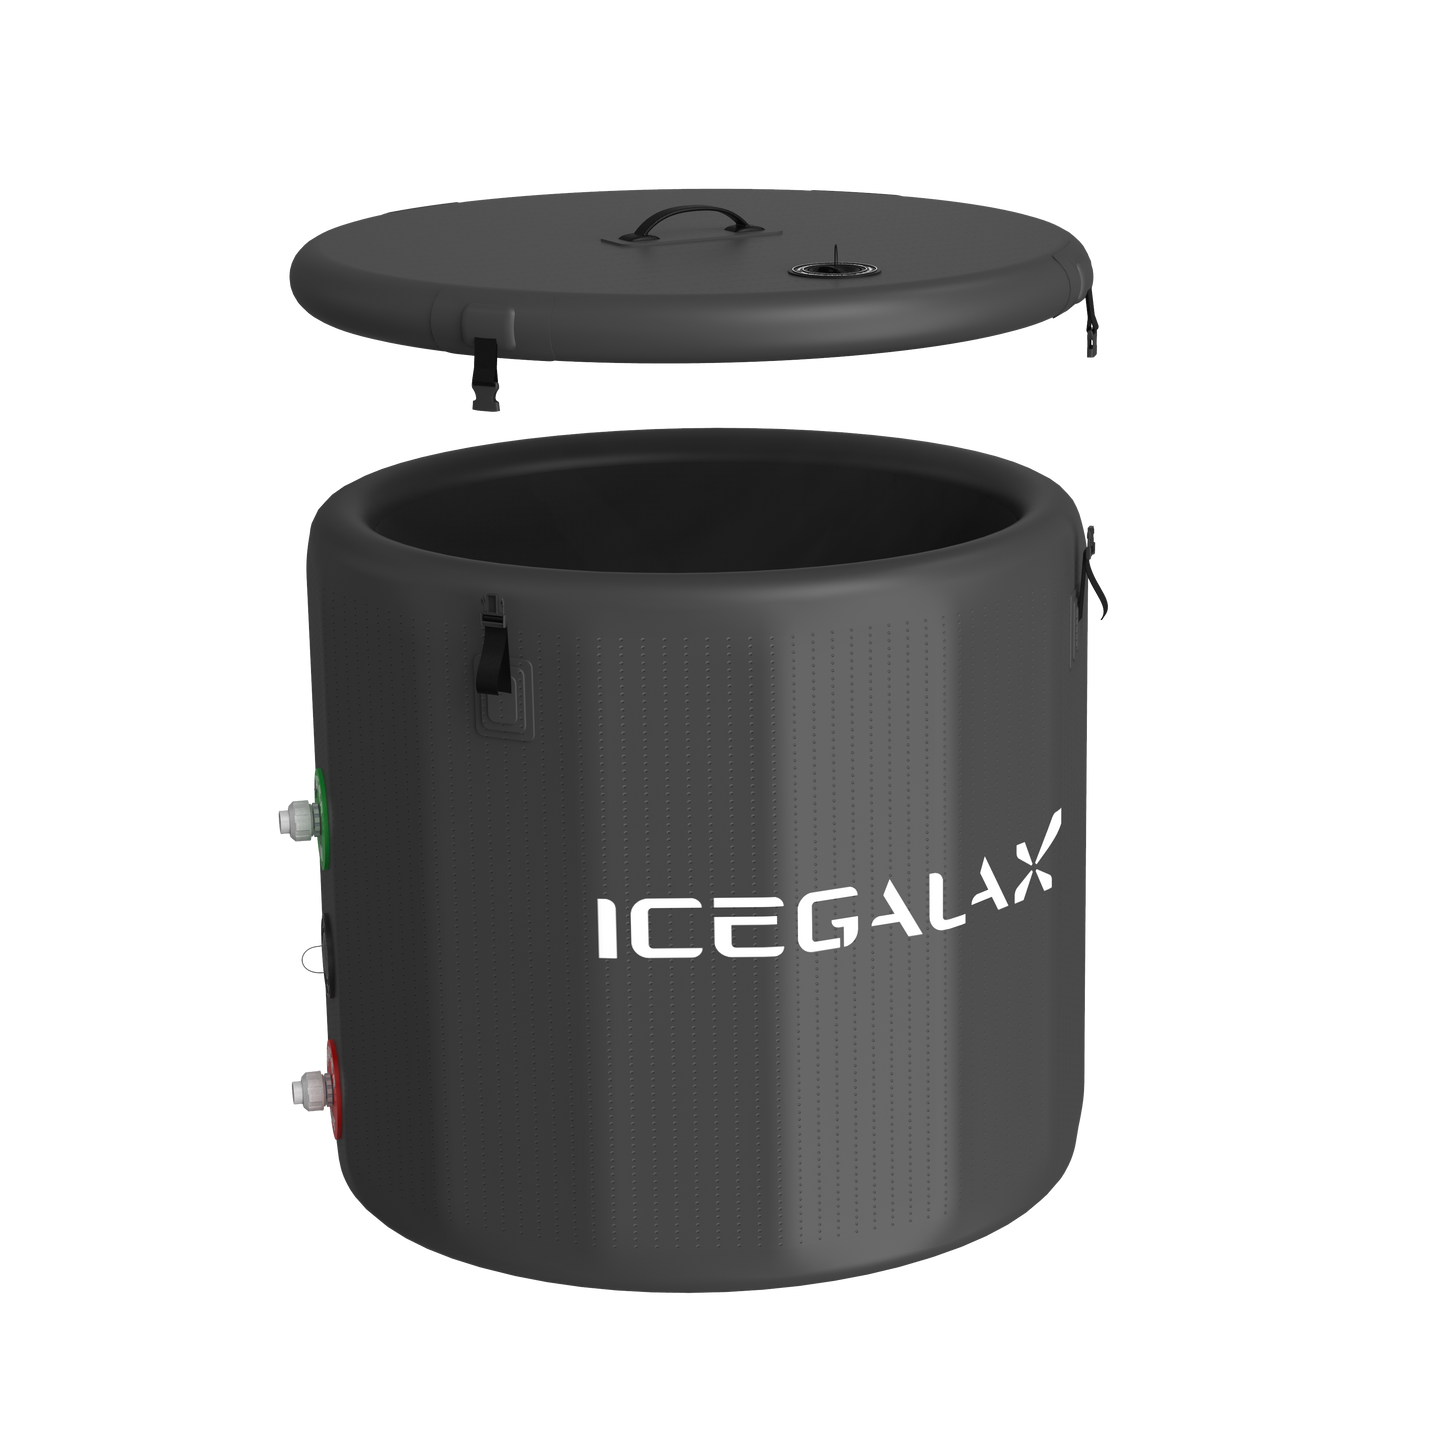 ICEGALAX Customized Black Inflatable Round Bathtub Ice Barrel For Cold Plunge